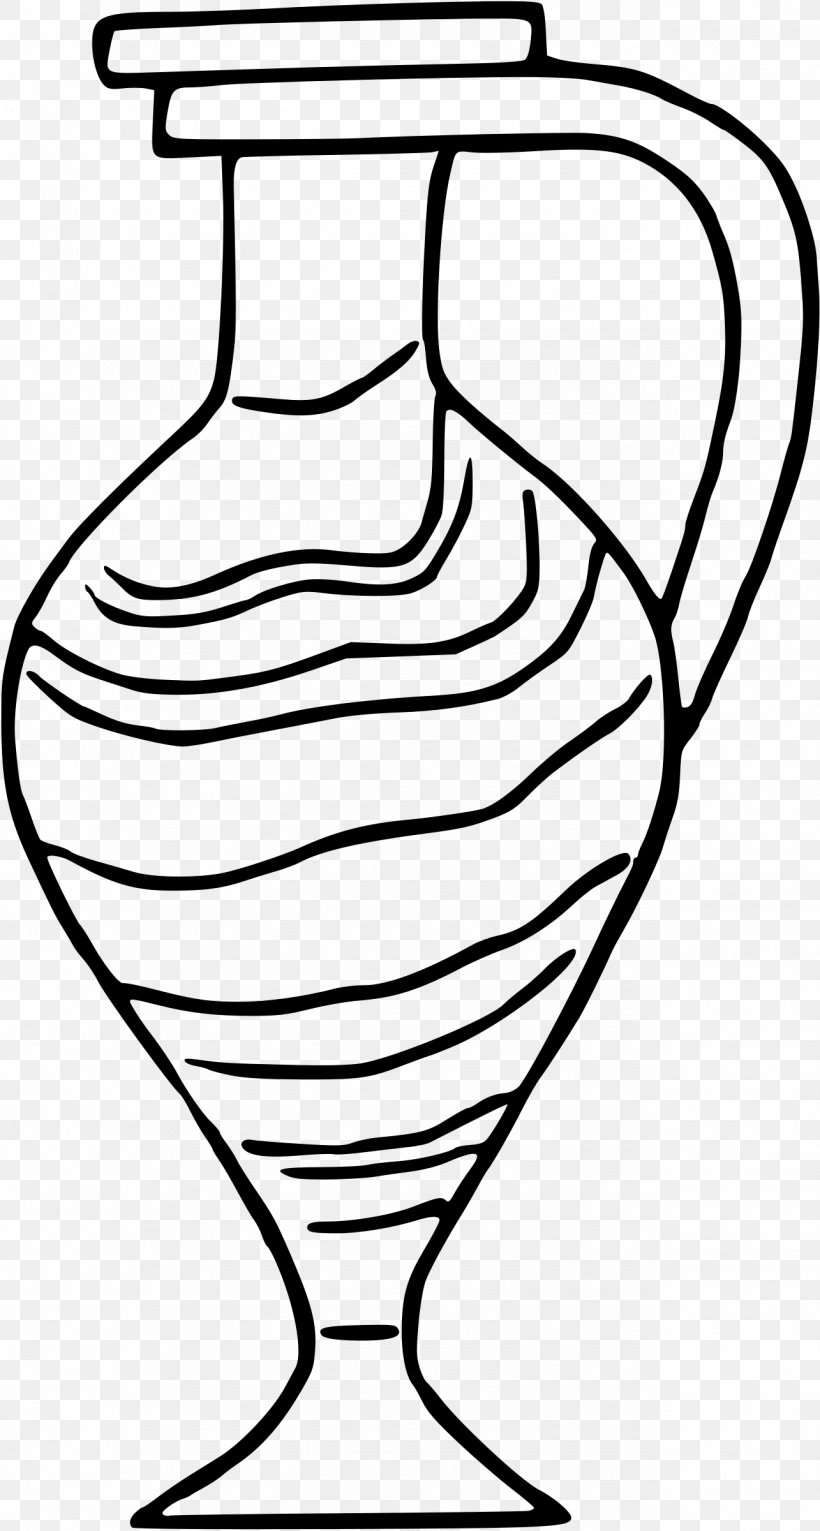 Black And White Vase Clip Art, PNG, 1285x2400px, Black And White, Artwork, Black, Coloring Book, Decorative Arts Download Free